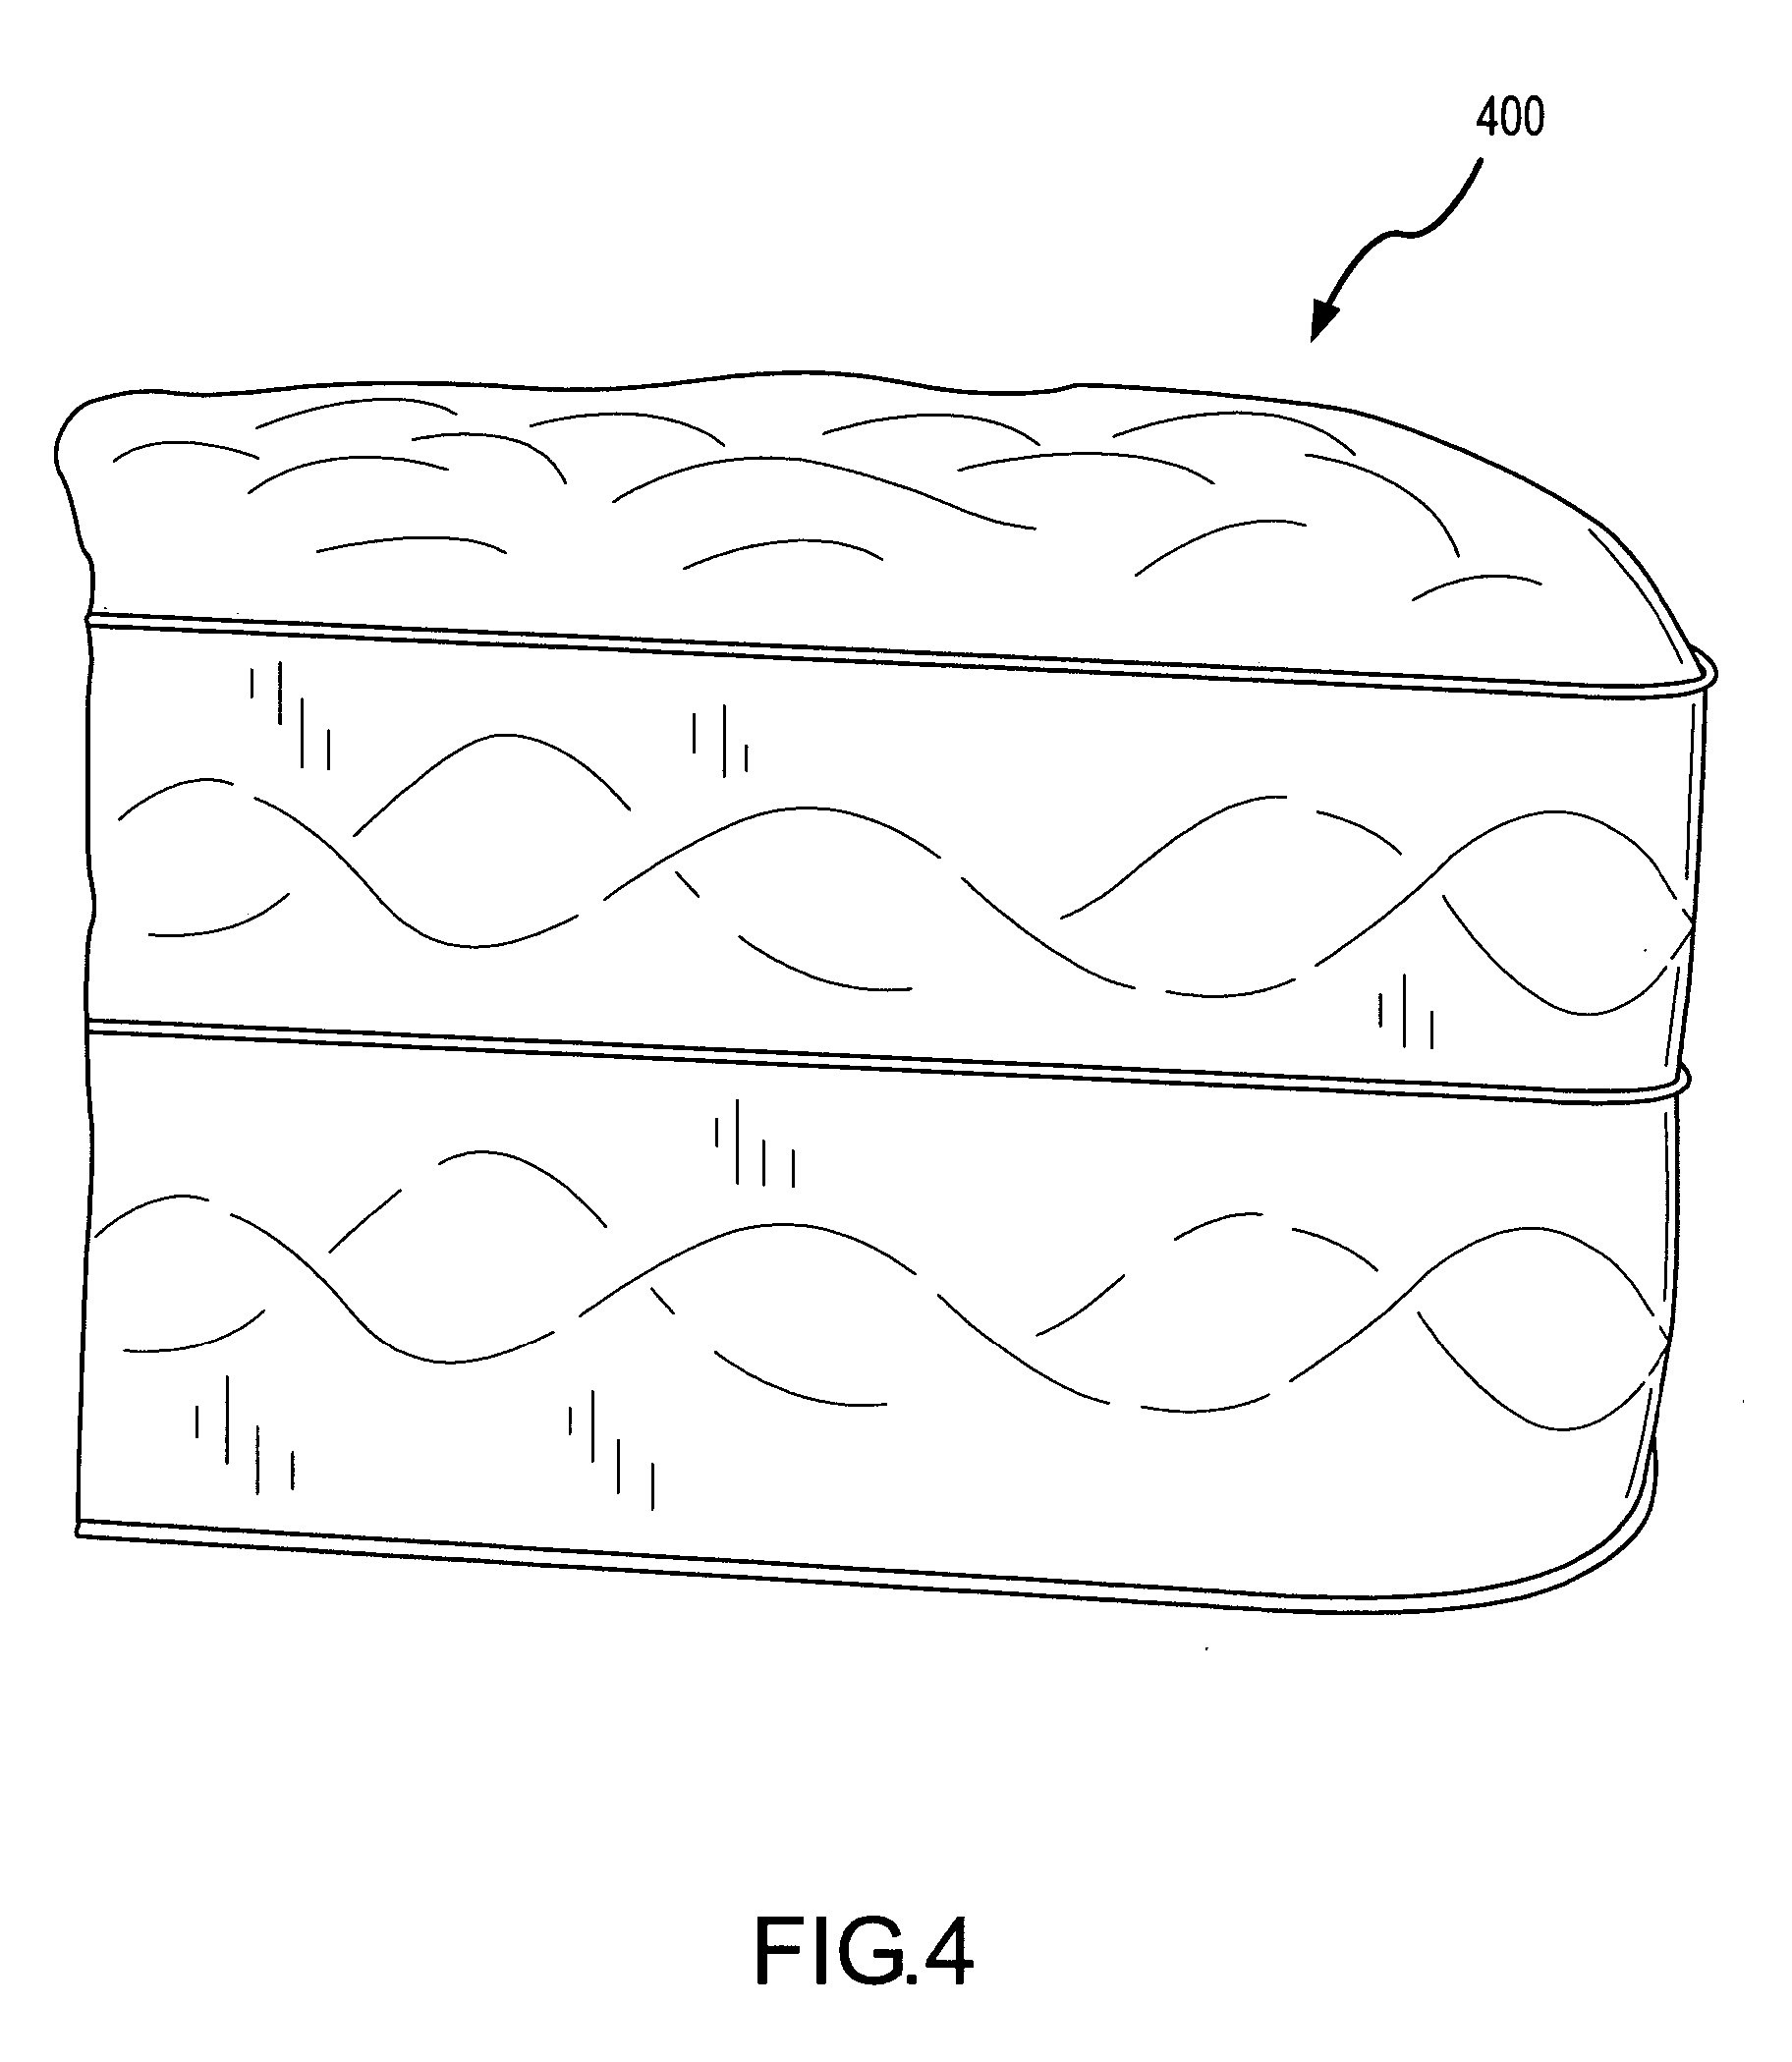 Mattress systems and methods of making